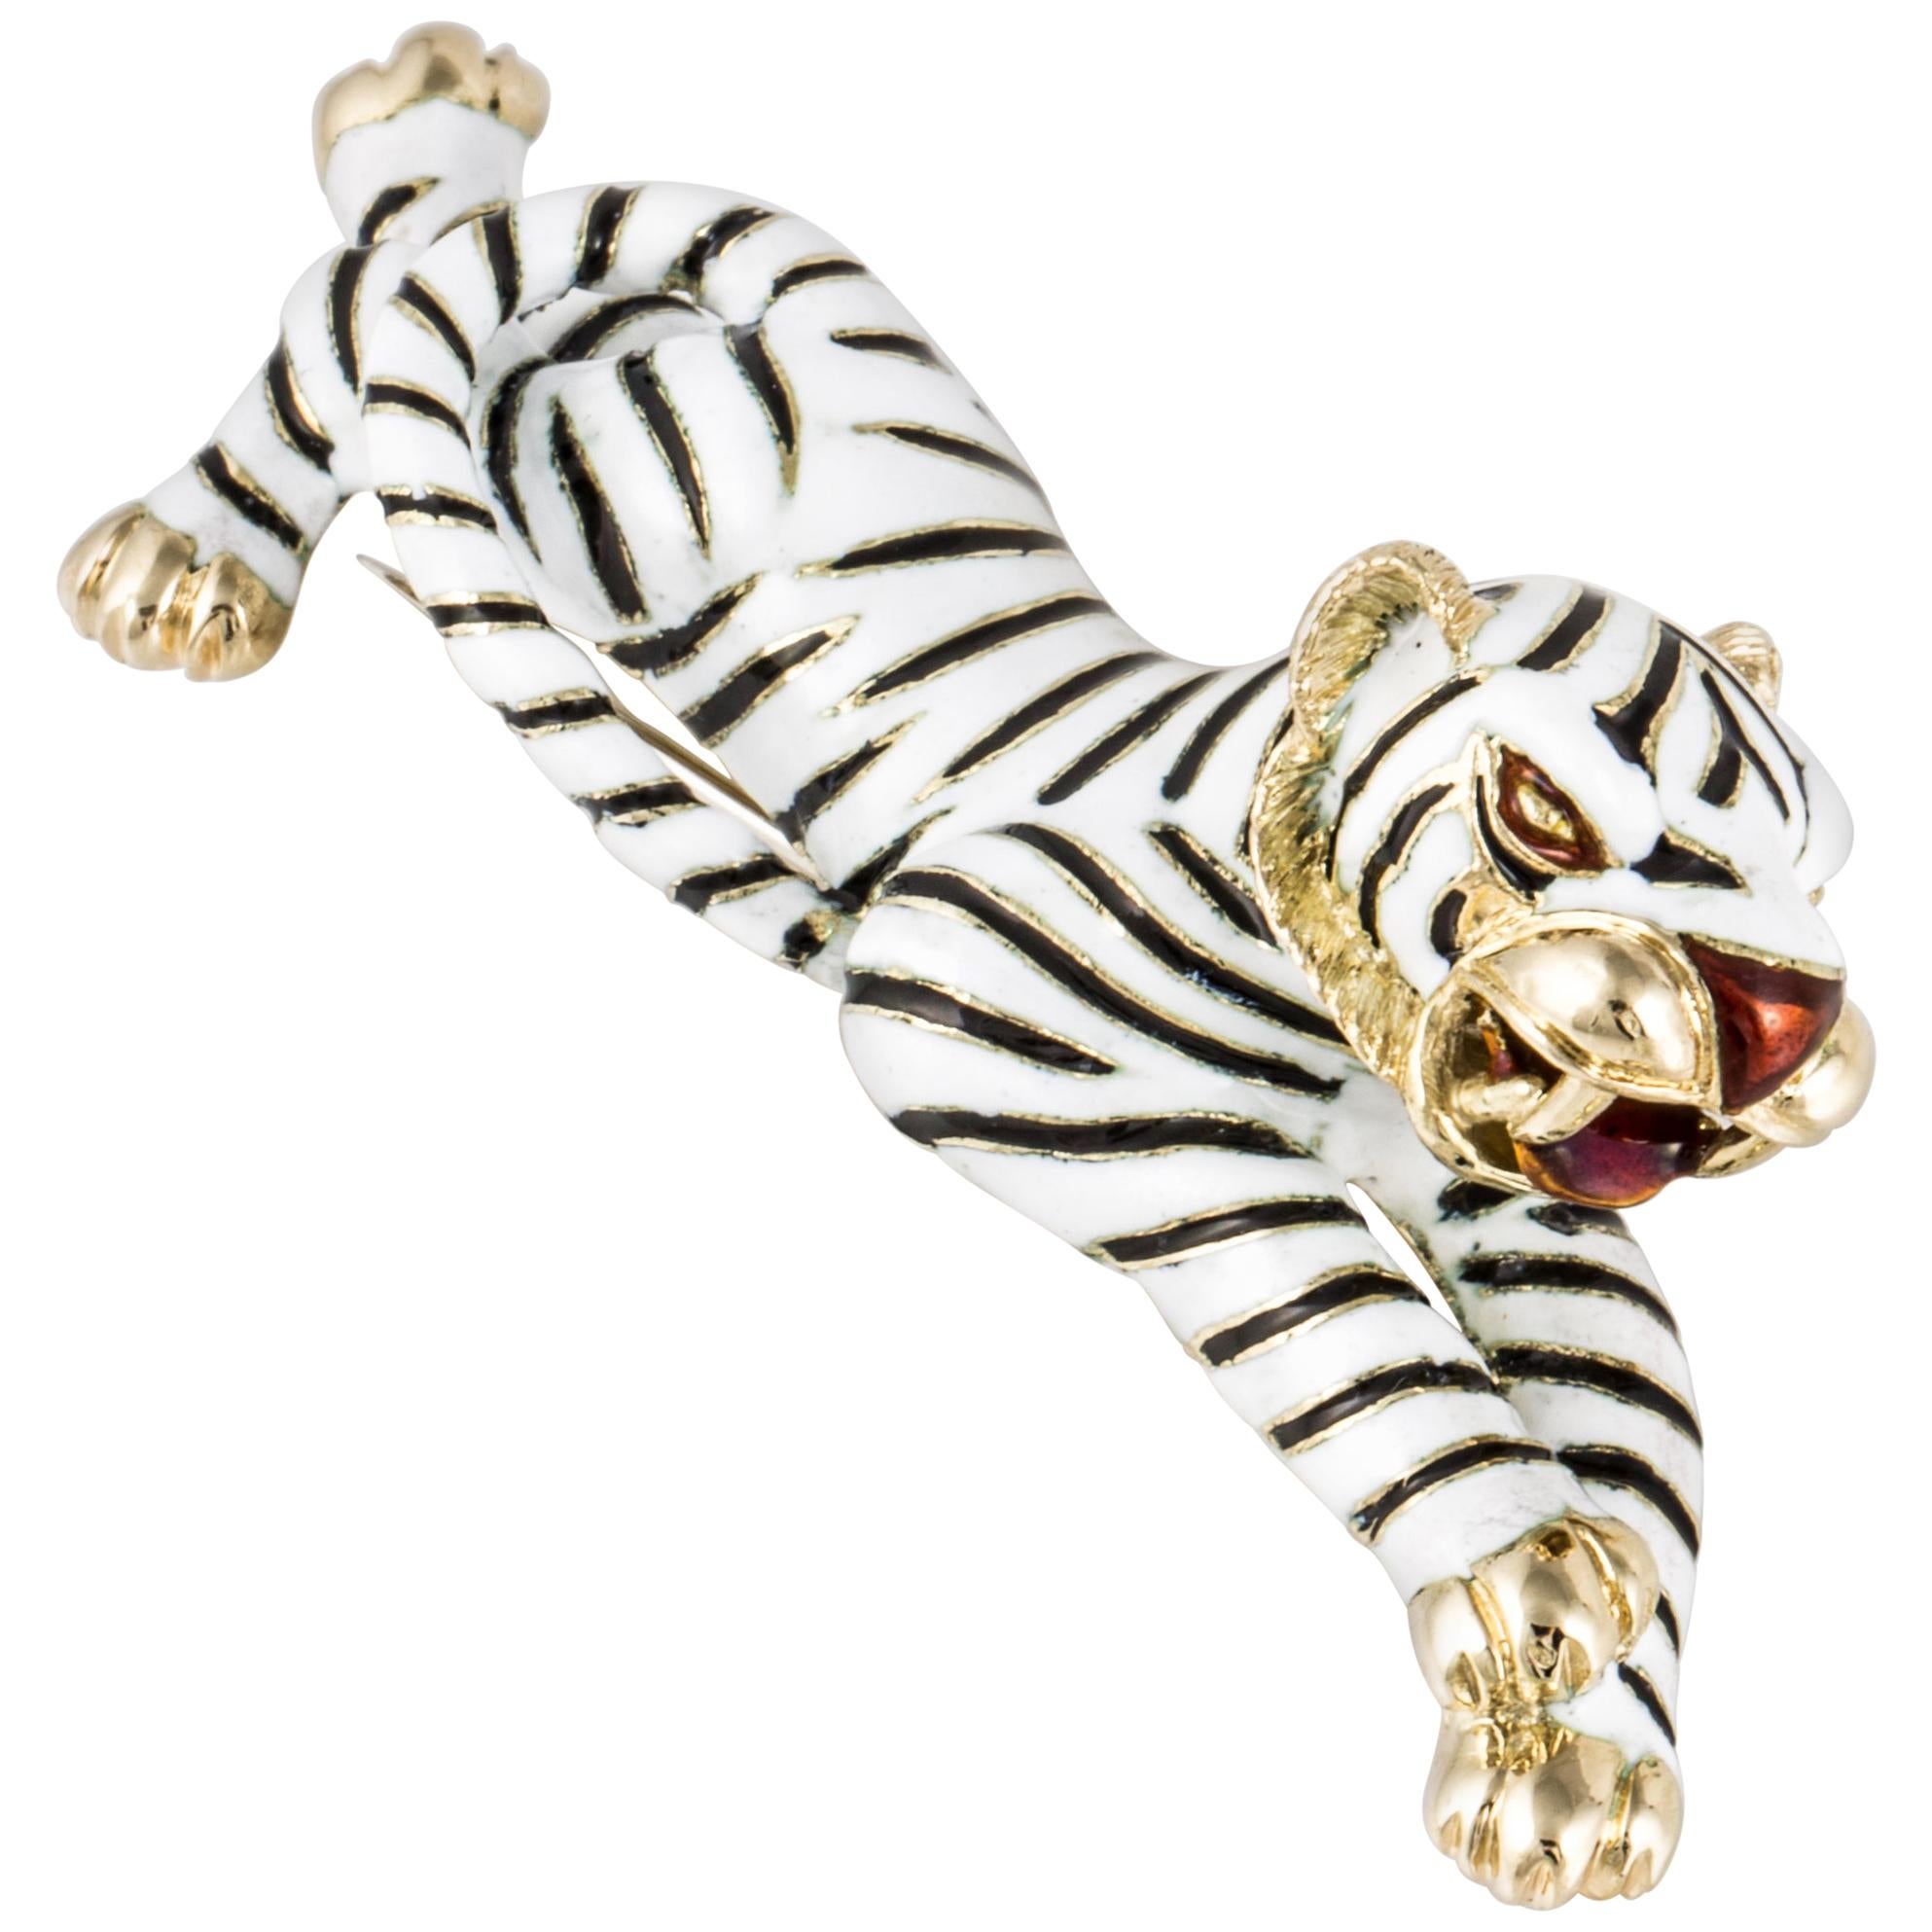 TIGER BROOCH EXTRA LARGE ARTICULATED 2 PINS BEST QUALITY CRYSTAL HAND ENAMELLED